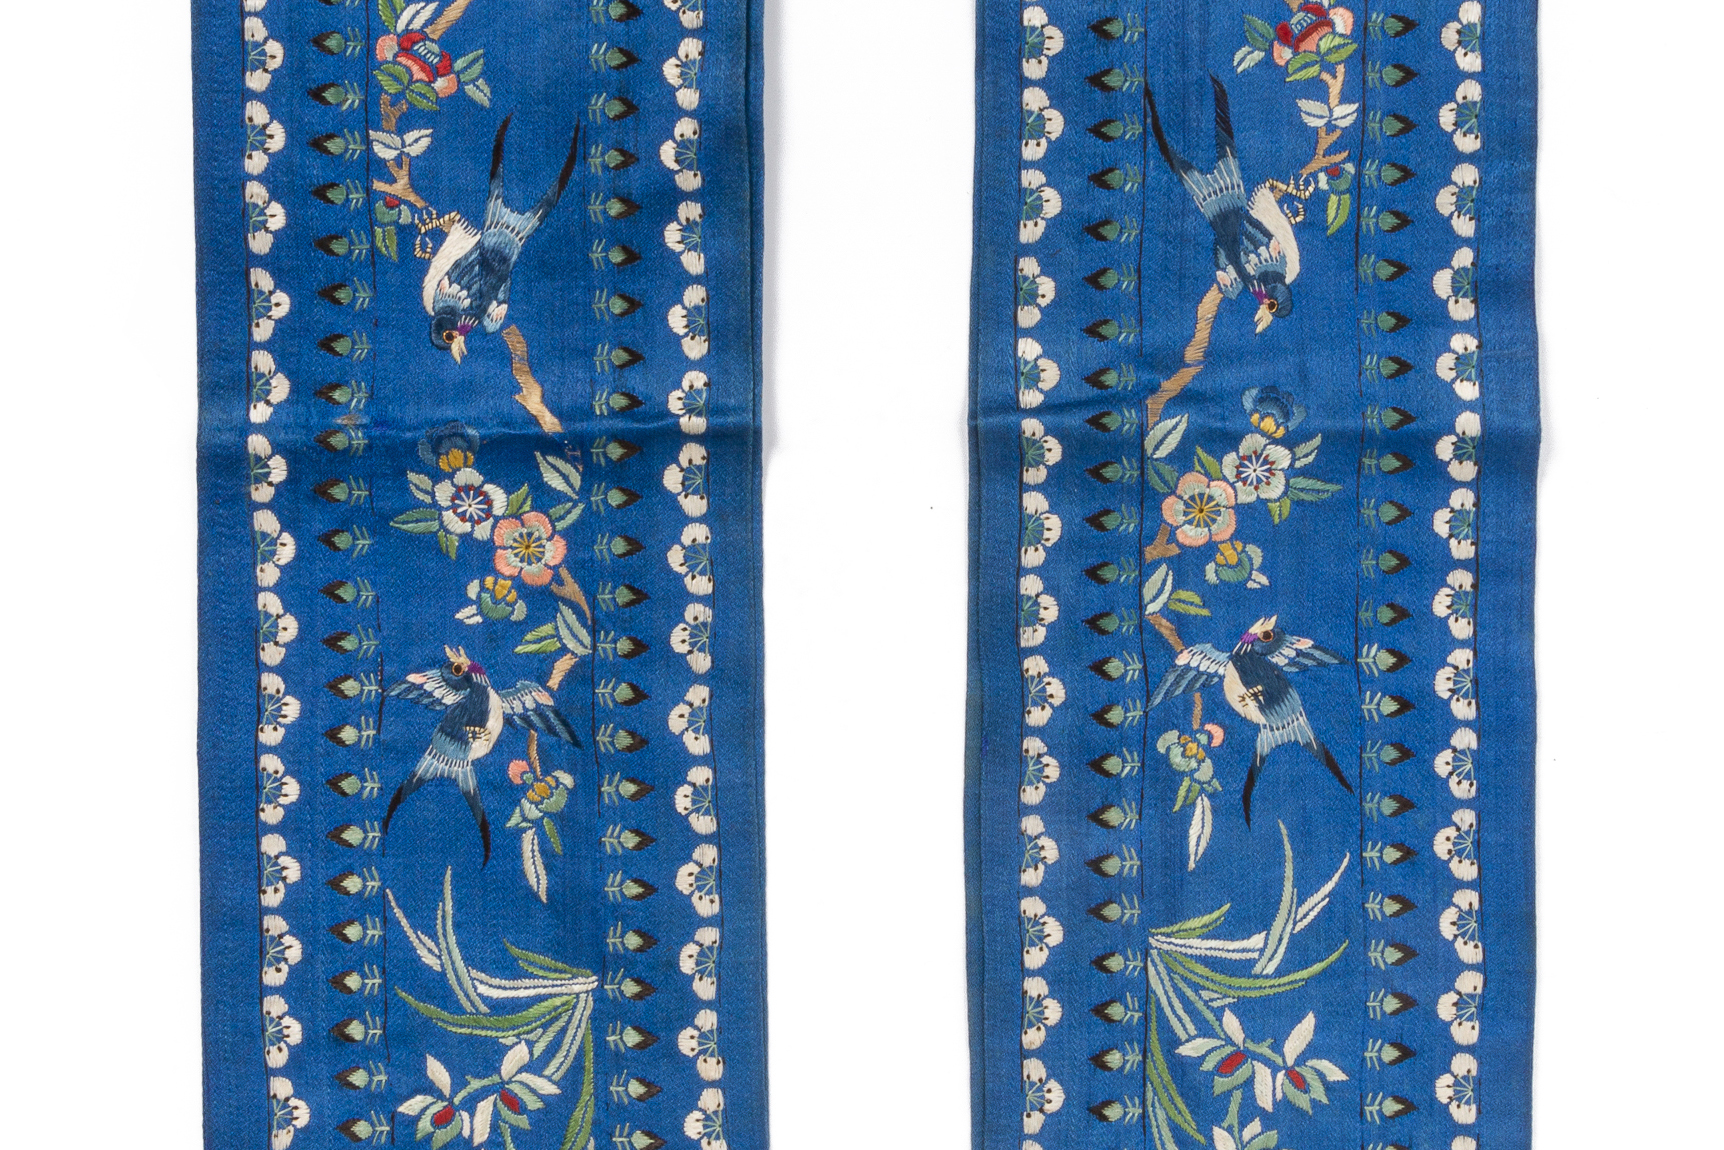 A PAIR OF CHINESE EMBROIDERED SLEEVE PANELS